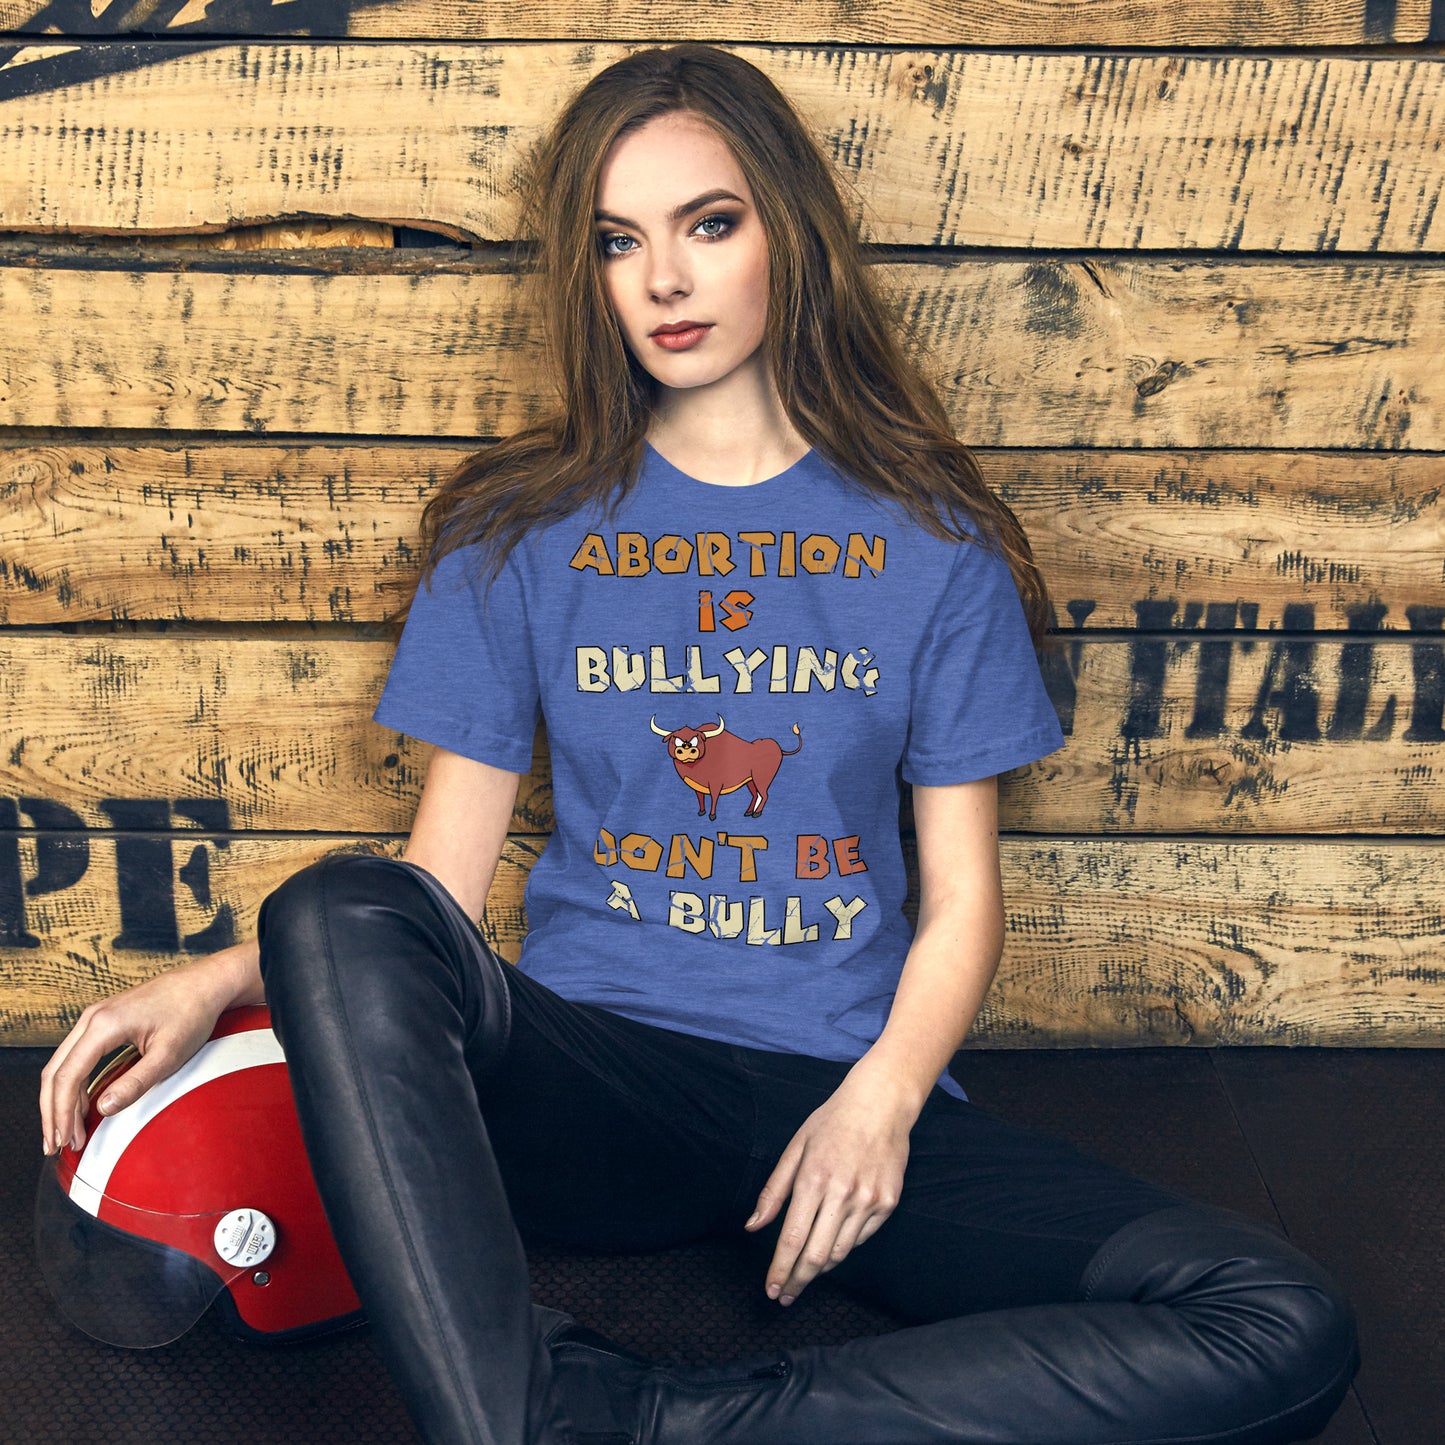 A001 T-shirt - Bella + Canvas 3001 Unisex T-shirt Featuring Bull-Steer Graphic with text “Abortion is Bullying. Don’t be a Bully.”